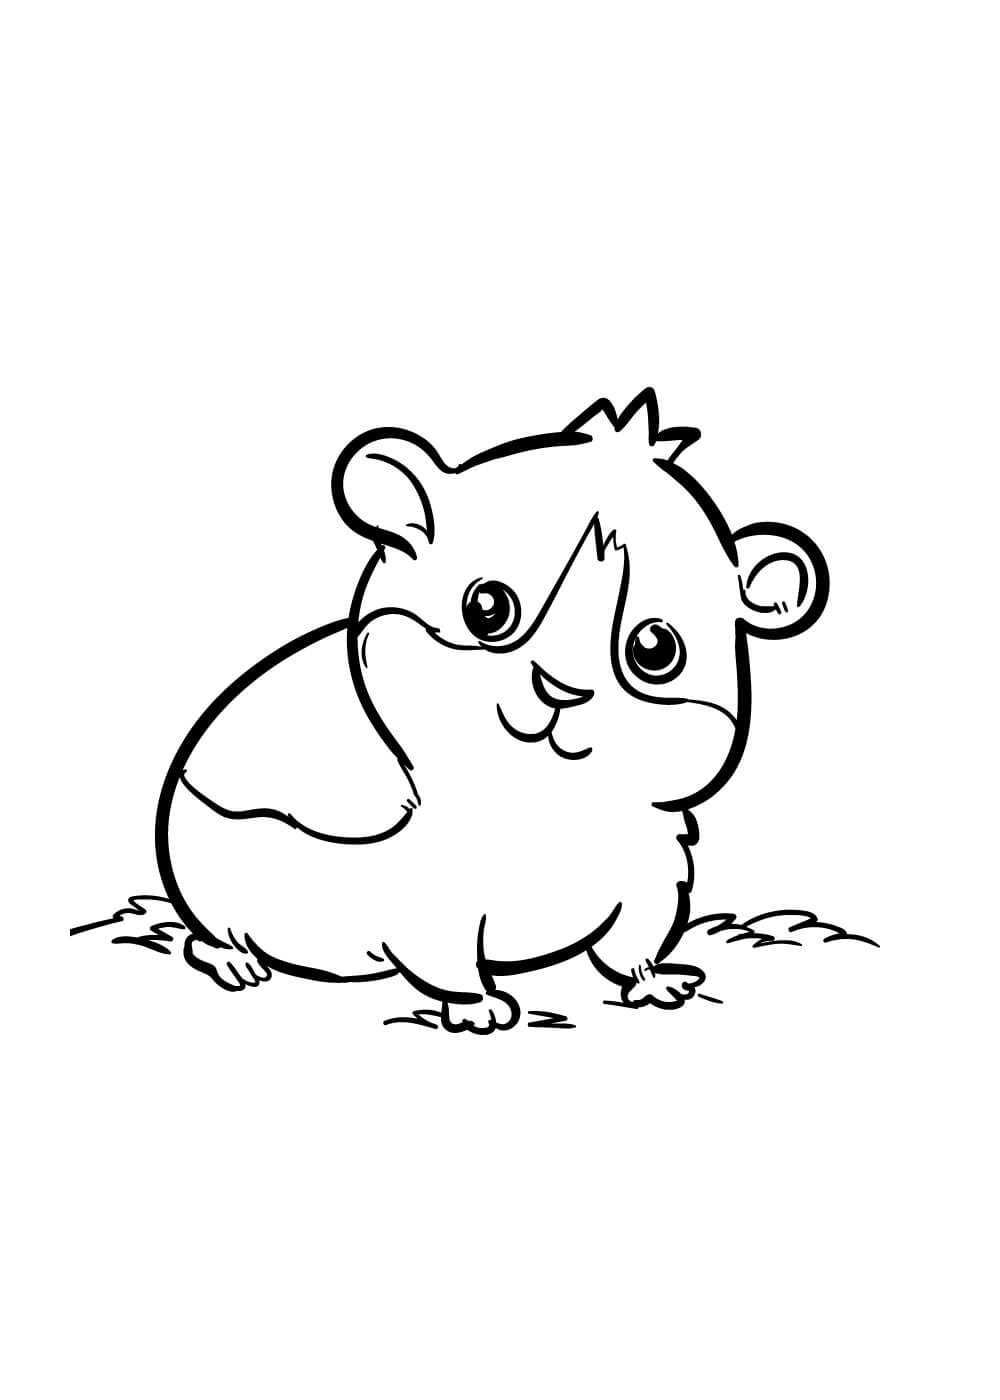 Awesome Hamster para colorir